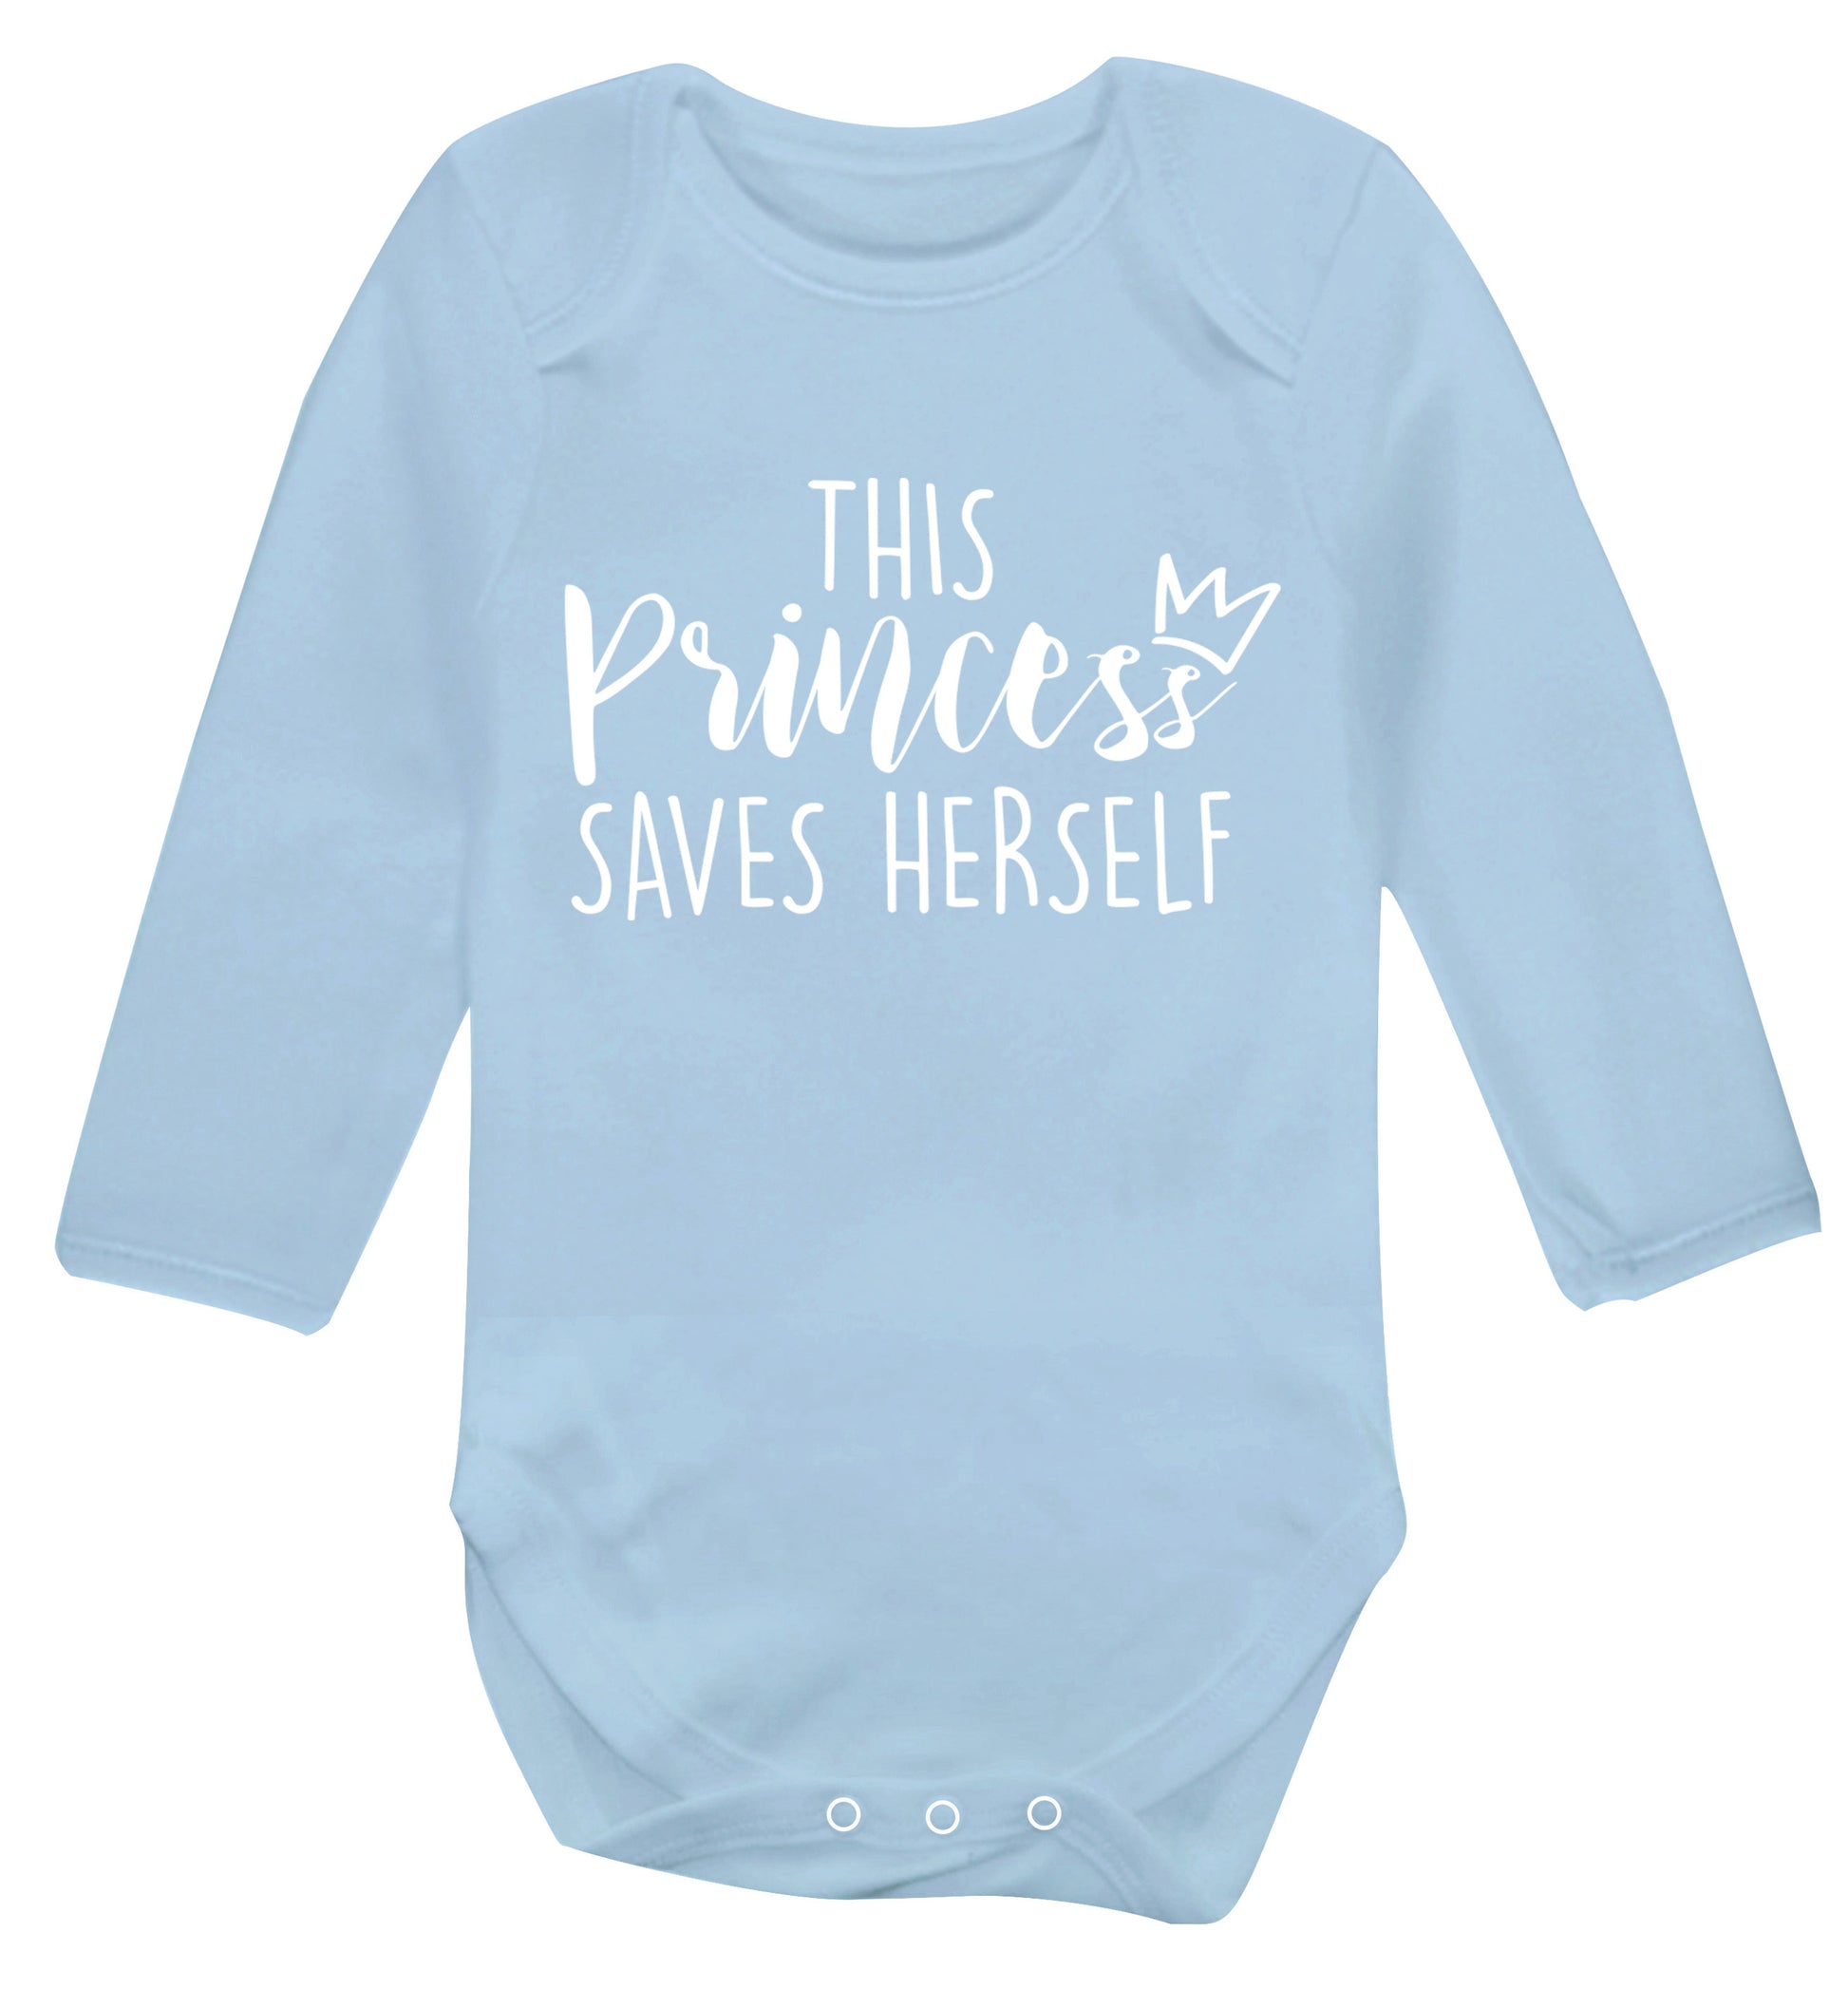 This princess saves herself Baby Vest long sleeved pale blue 6-12 months